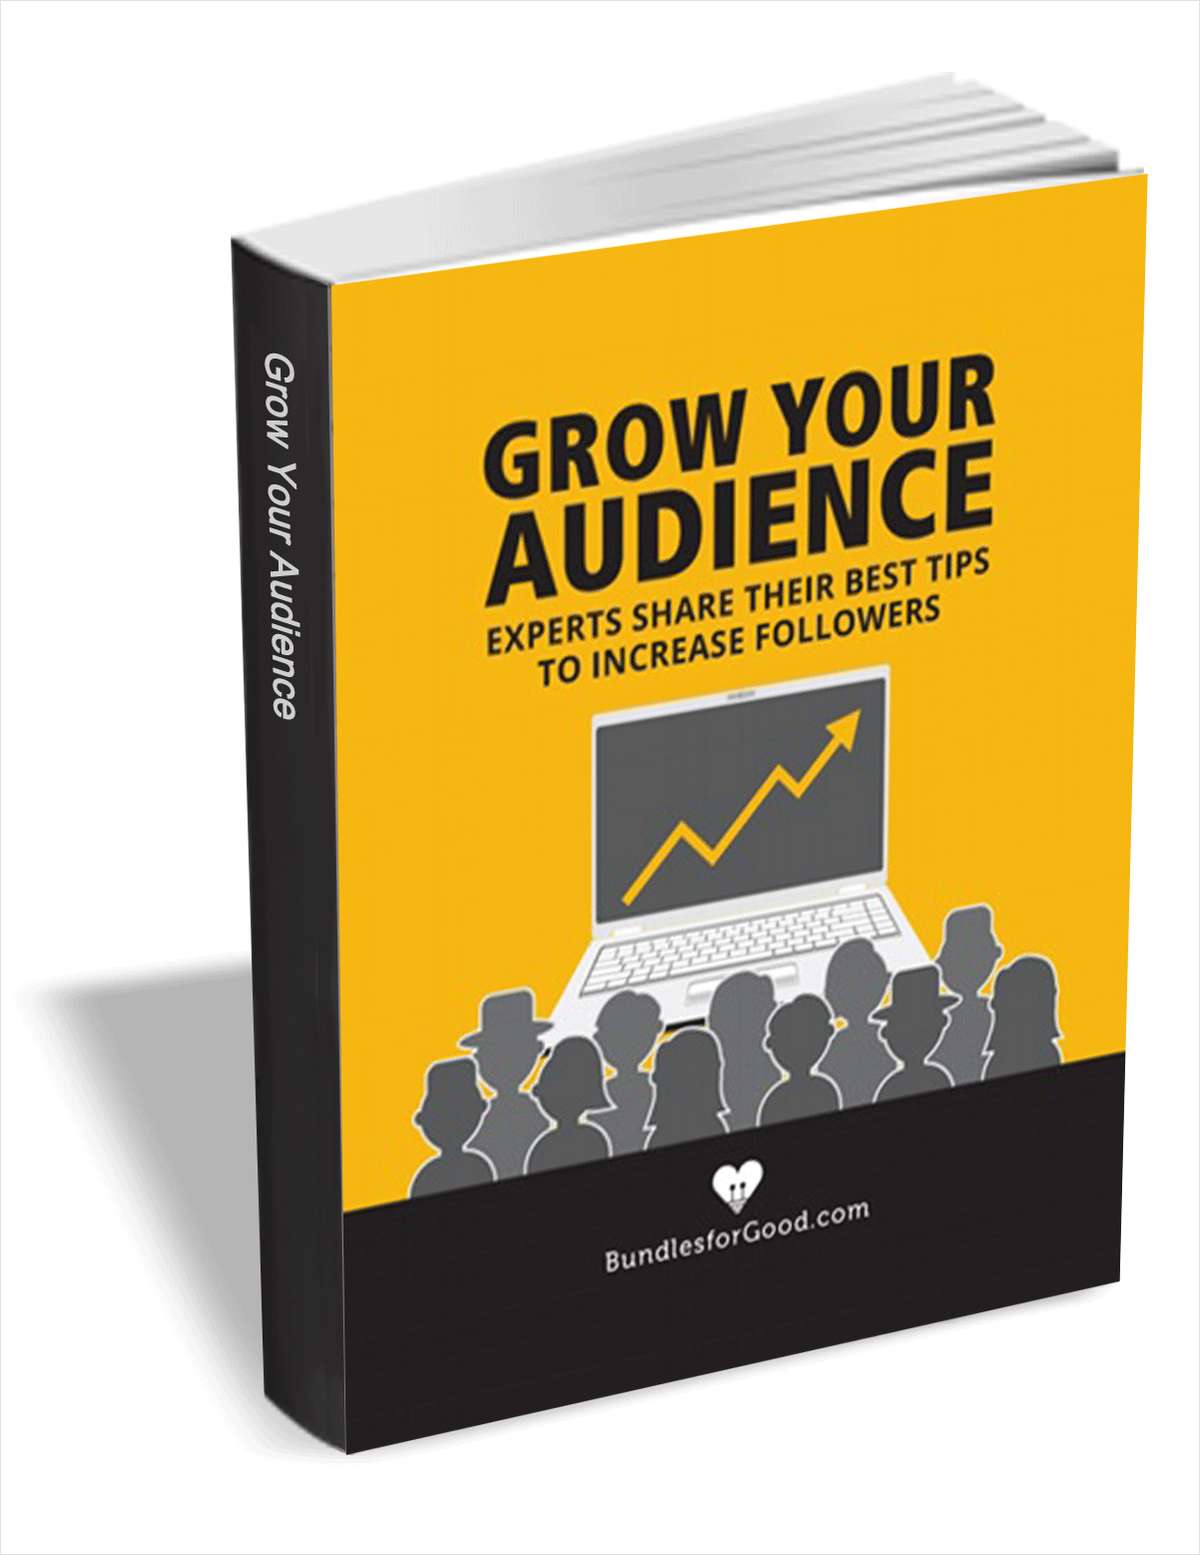 Grow Your Audience - Experts Share Their Best Tips to Increase Followers